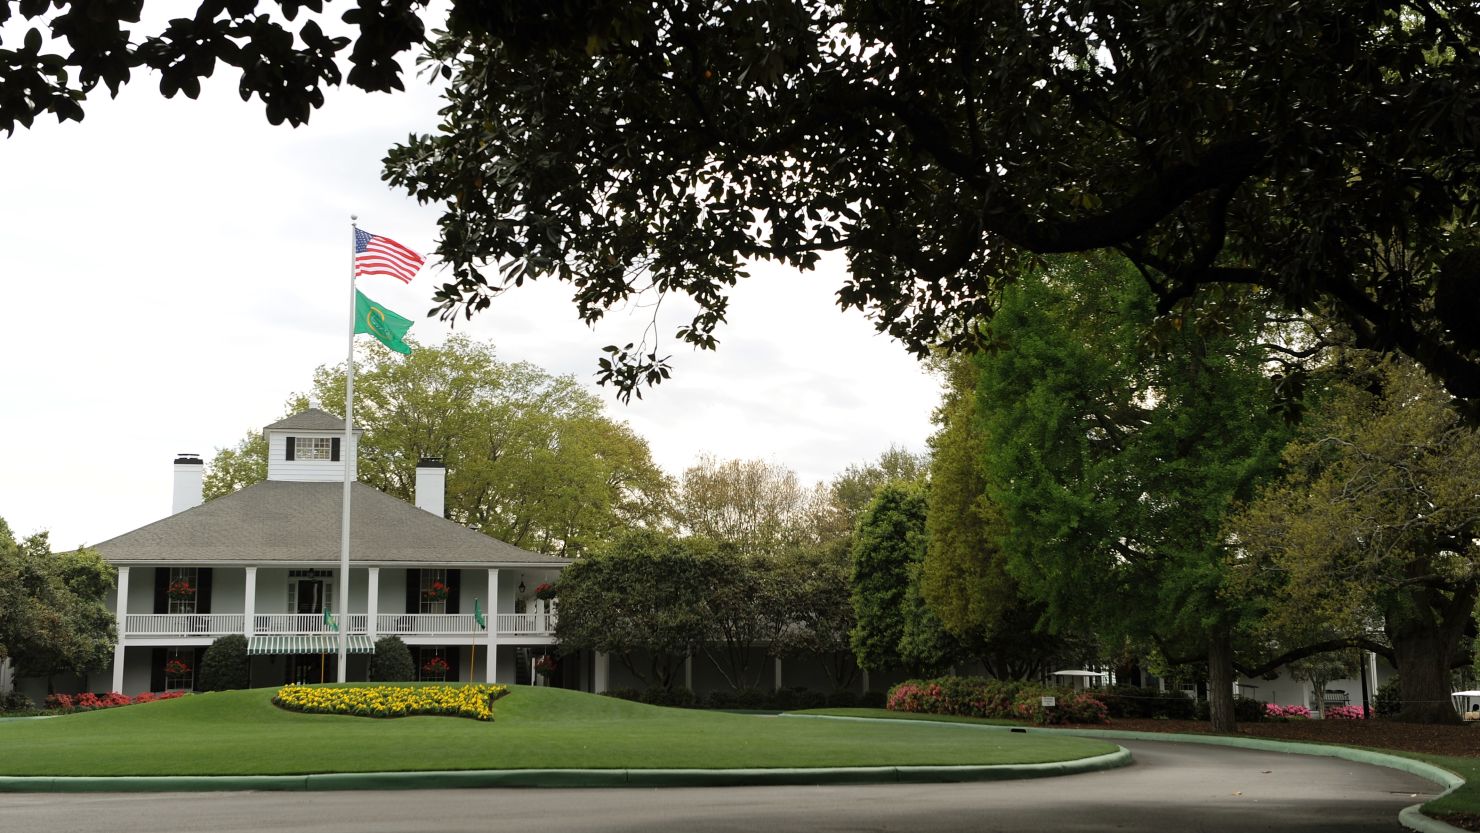 Augusta National's men-only policy is stirring controversy as the Masters Tournament begins.